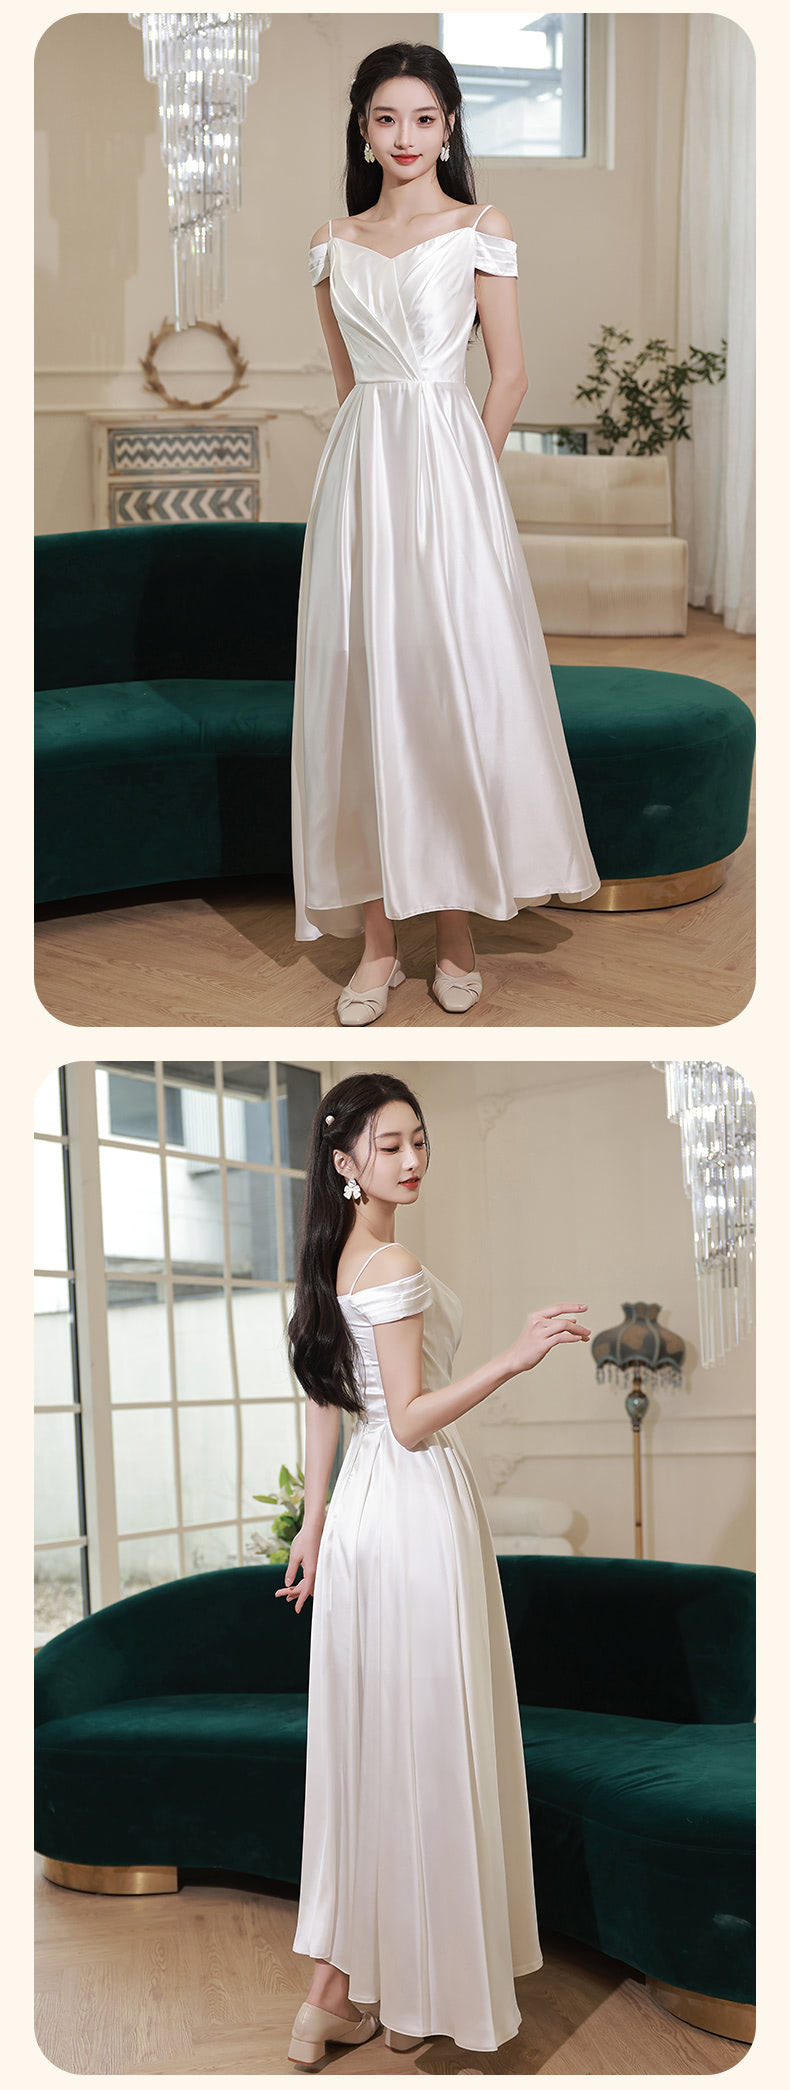 Sweet-White-Satin-Wedding-Party-Dress-Homecoming-Evening-Gown22